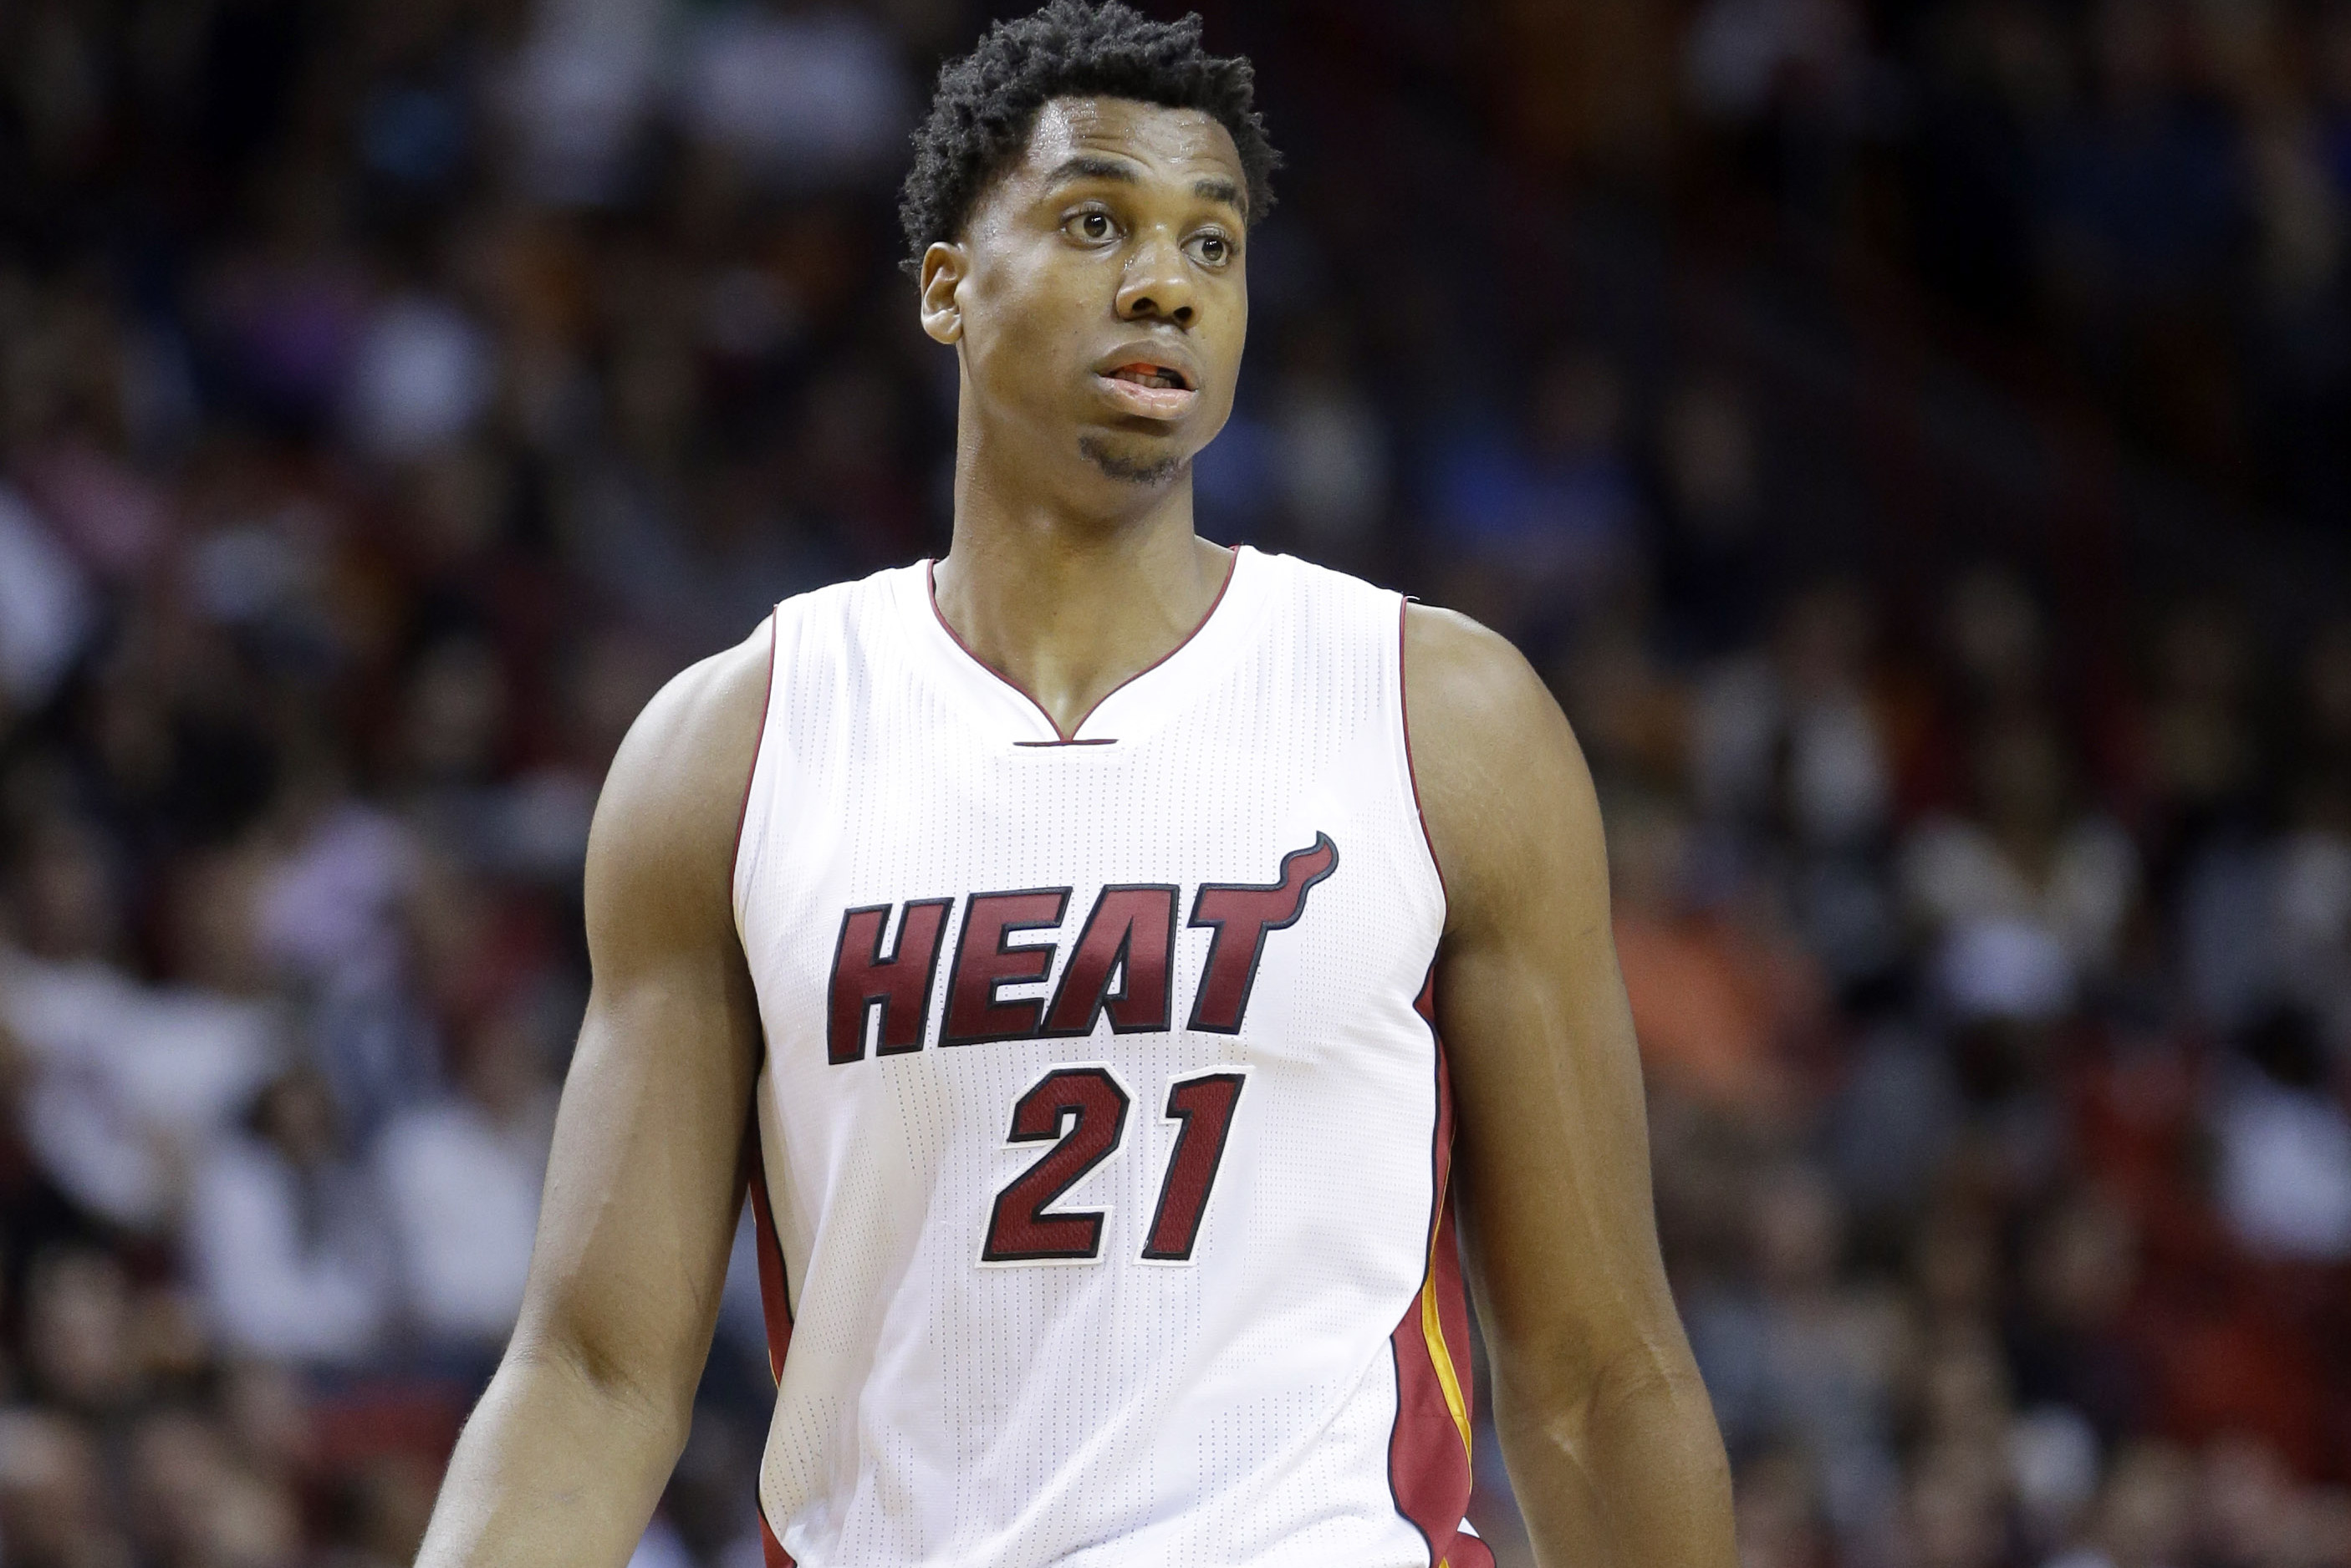 Hassan Whiteside's Snapchat has officially become mainstream